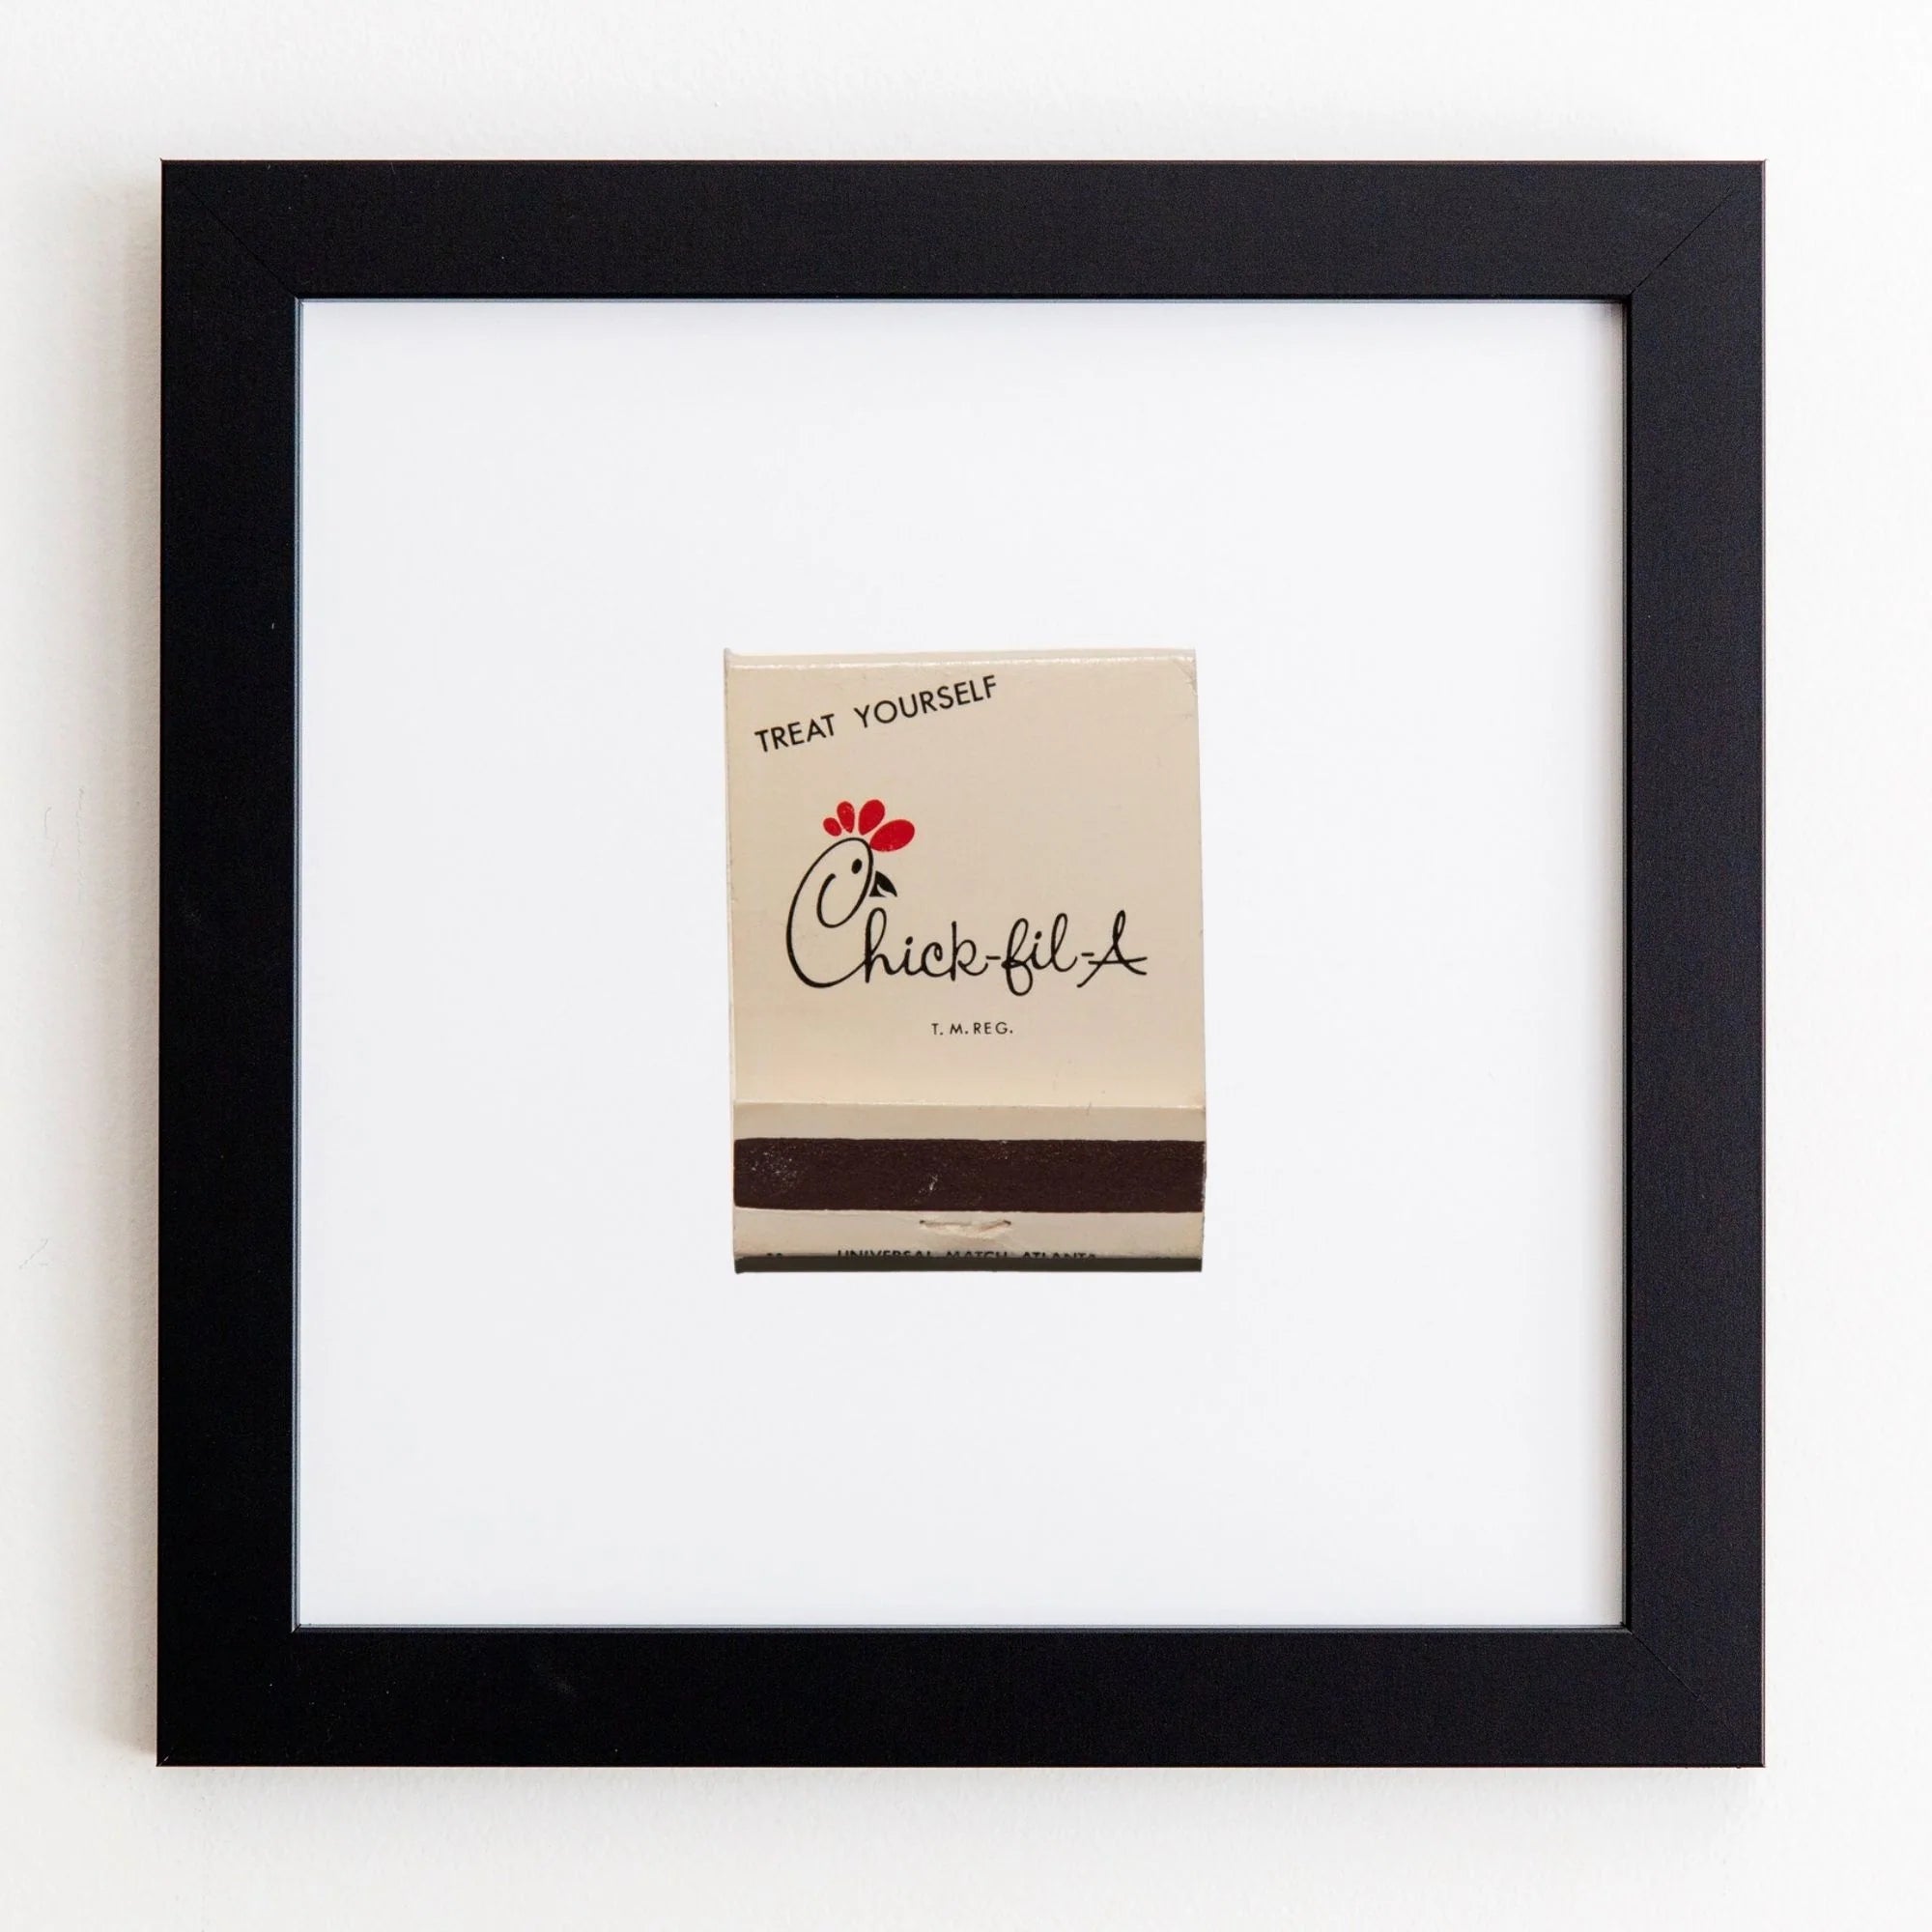 A framed Match South &quot;Treat Yourself&quot; gift card mounted on a white wall. The card features the Chick-fil-A logo and a small red heart above the acrylic text.